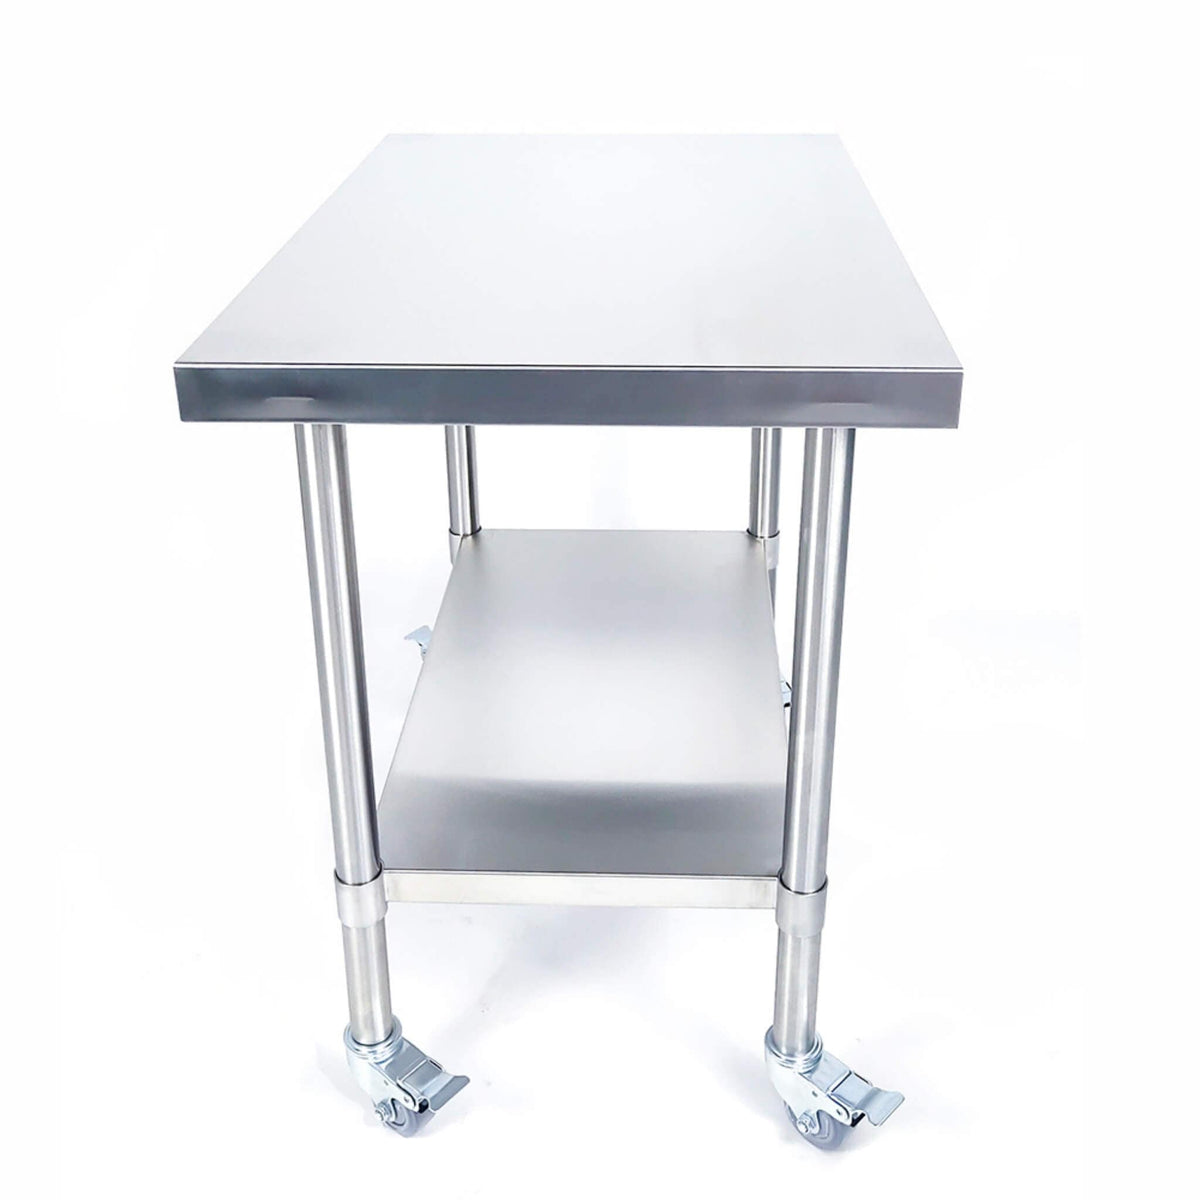 Tagwood BBQ Working table | Stainless steel